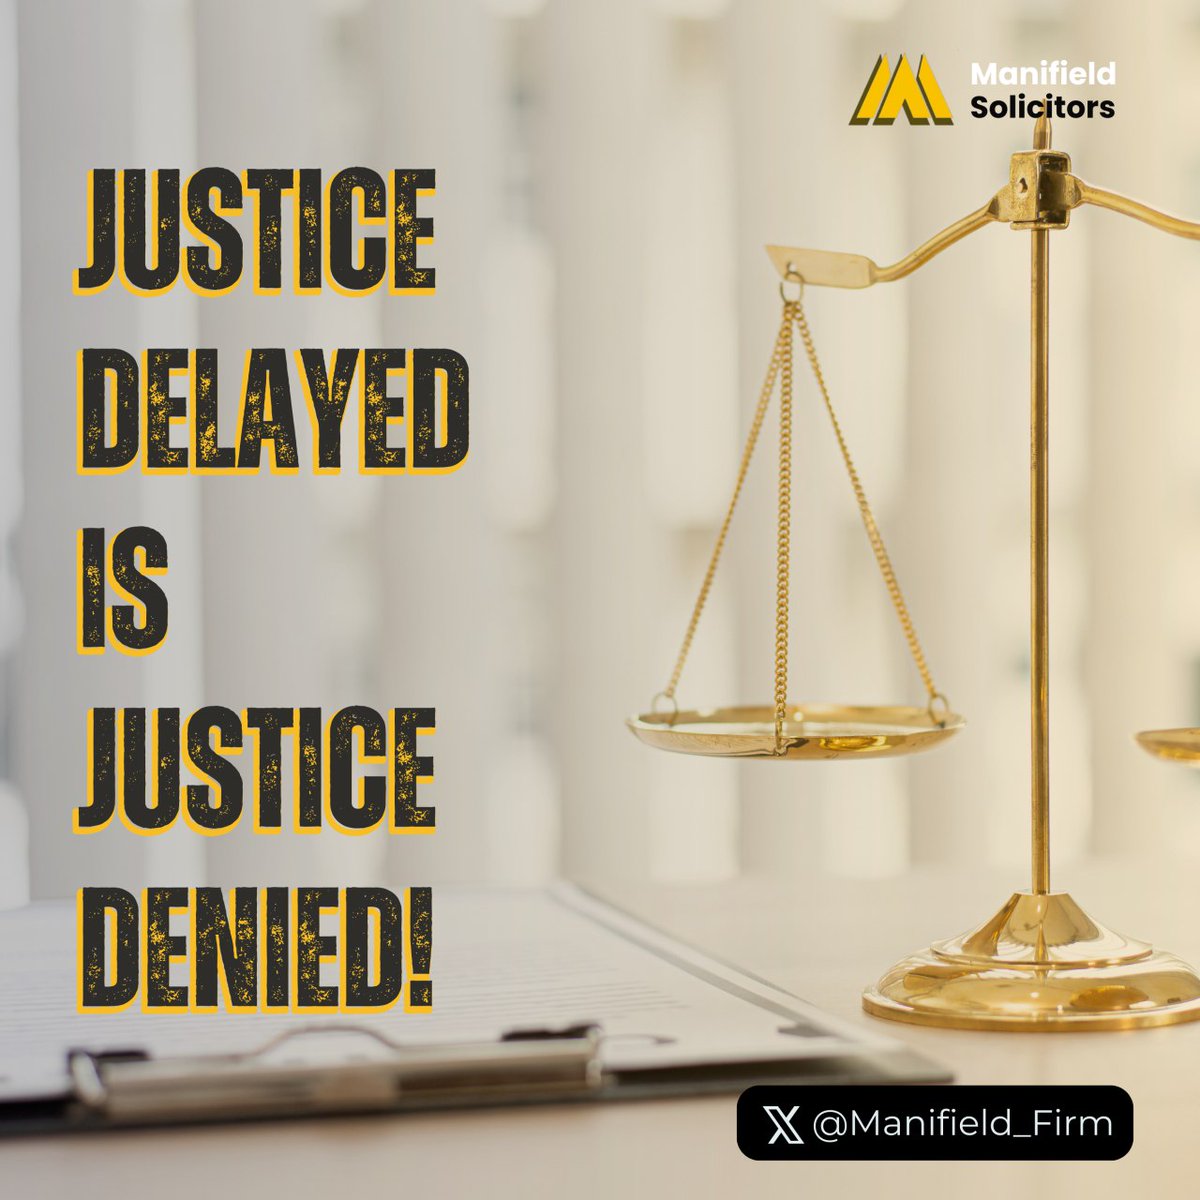 Justice delayed is justice denied! Manifield Solicitors is committed to ensuring timely and effective legal solutions. We're interested in hearing your thoughts on the importance of timely justice. Share your insights below. 

#JusticeMatters #LegalRights #ManifieldSolicitors